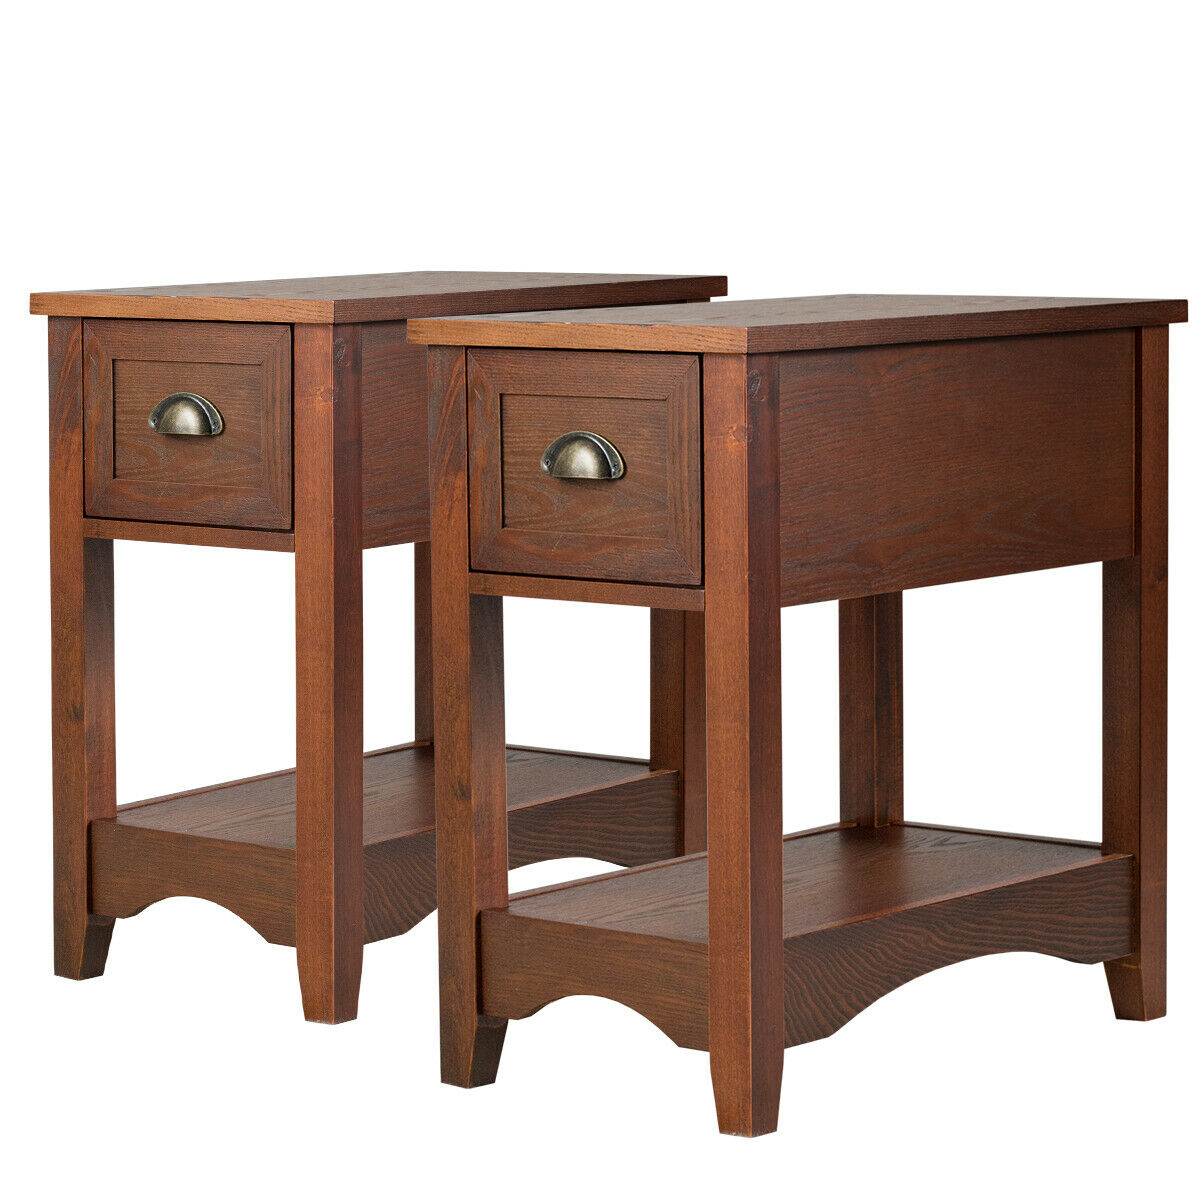 Set Of 2 Contemporary Side End Table Compact Table W/ Drawer Nightstand Espresso/Tawny/Walnut - Walnut